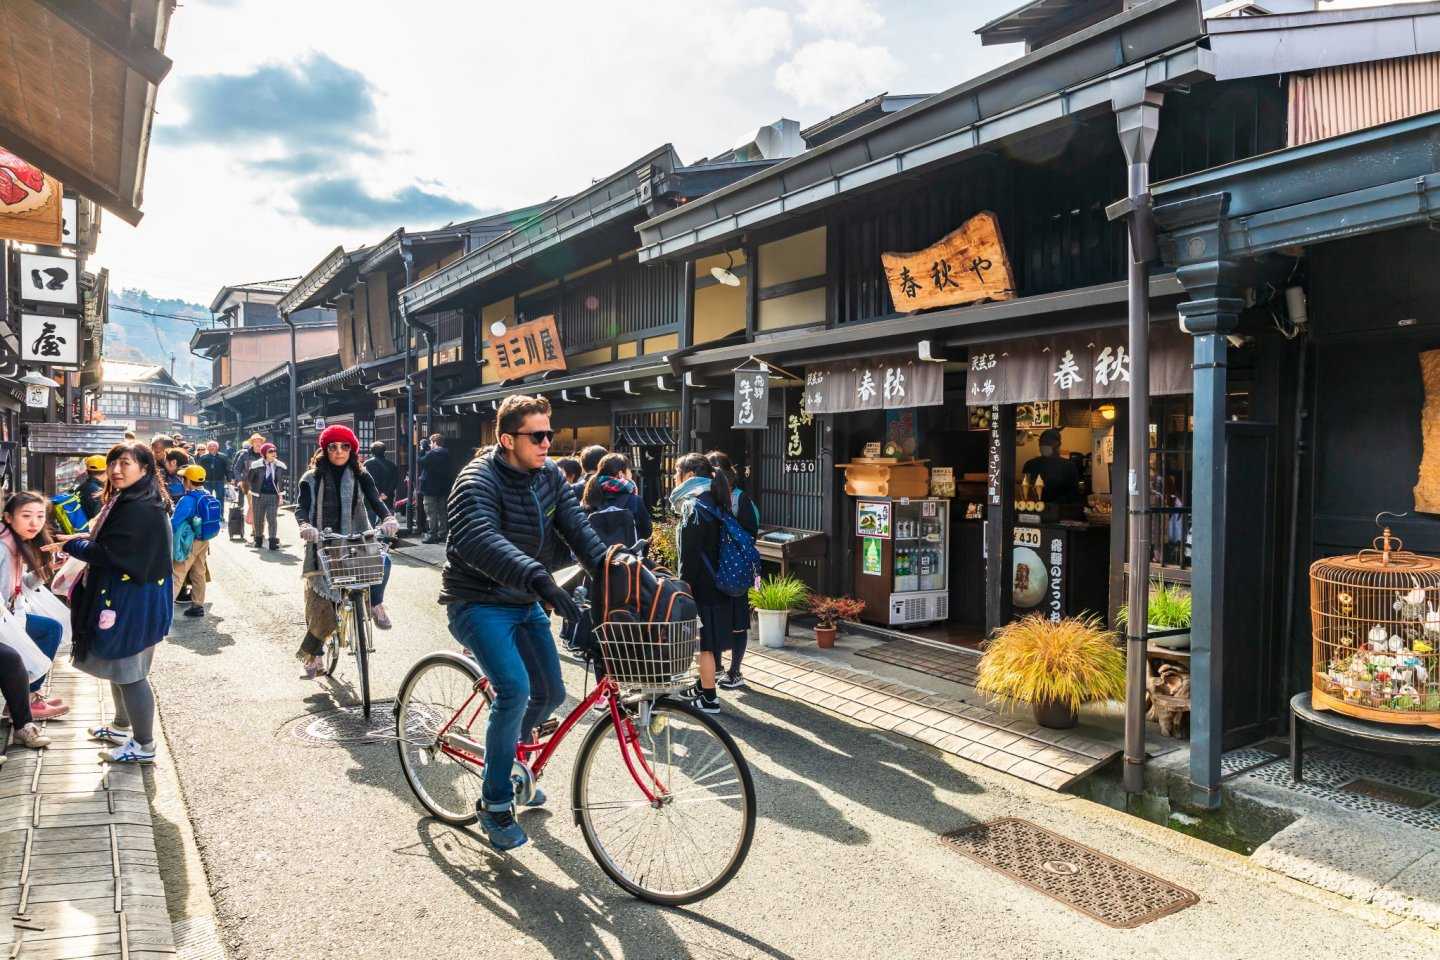 Should a license be required to ride a bicycle in Japan?